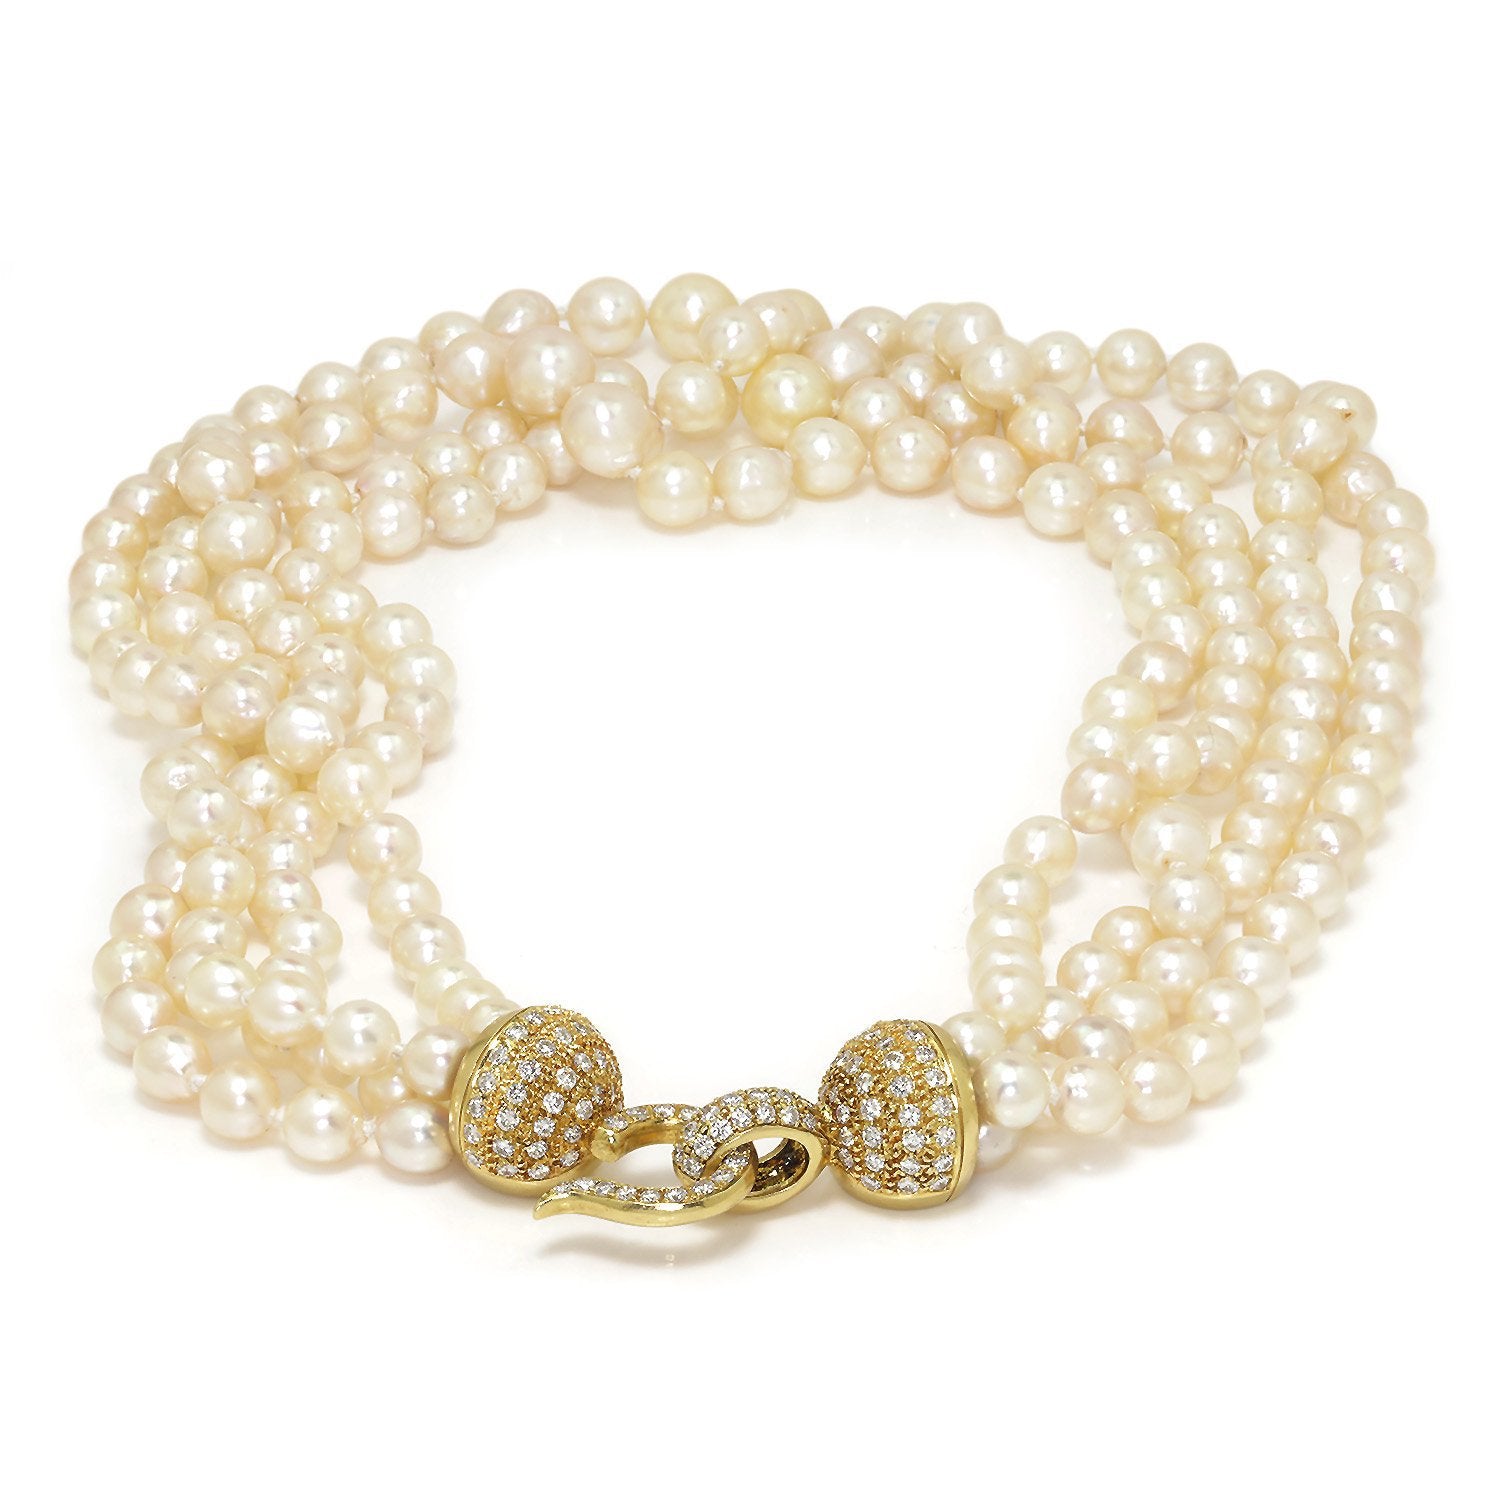 11-12mm AA+ Baroque Pearl Necklace with Magnetic Clasp